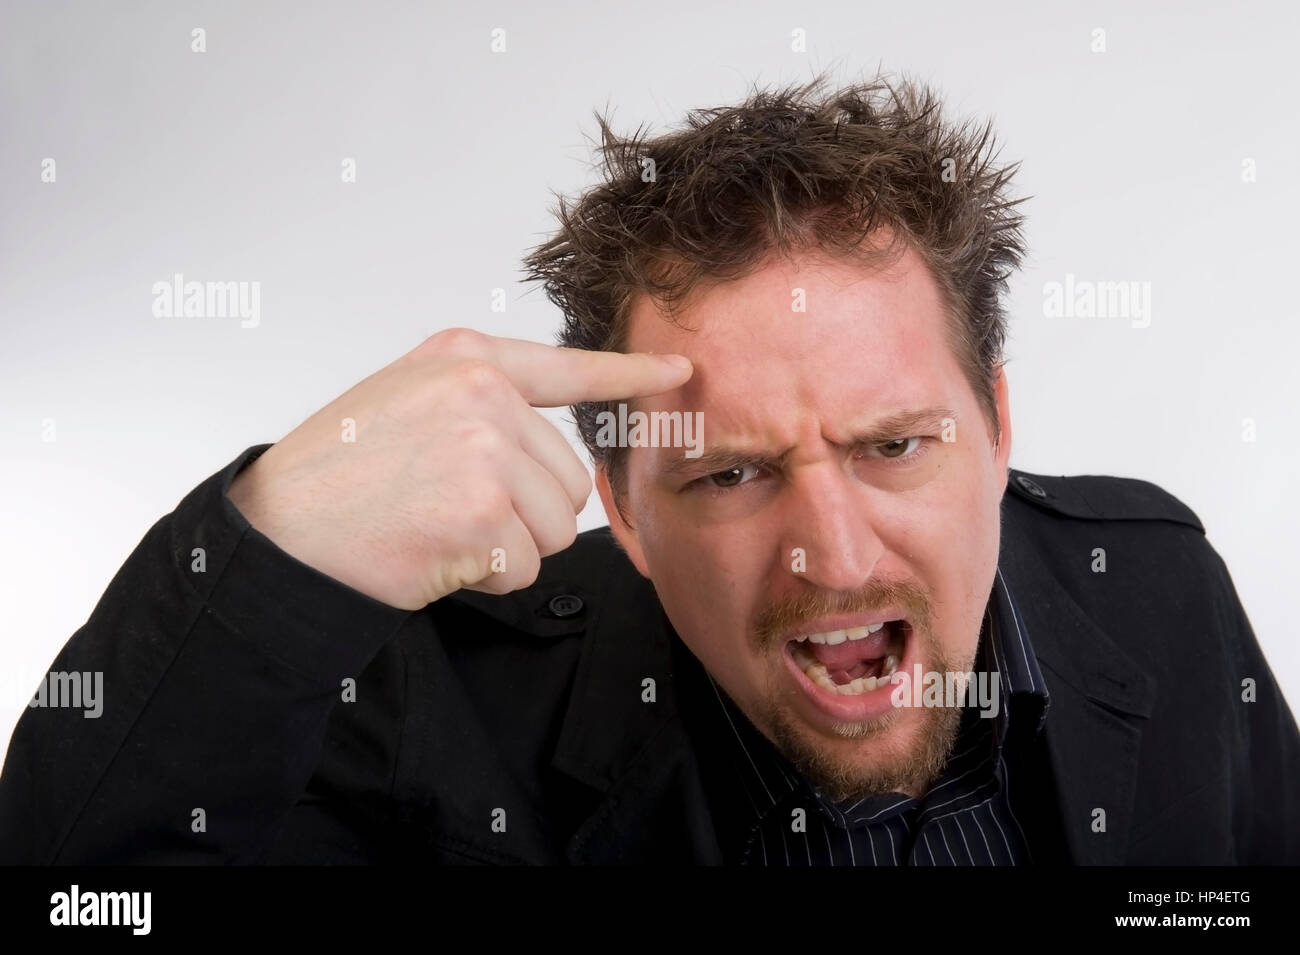 Model released , Zorniger, junger Mann zeigt den Vogel - young man  tap one's forehead Stock Photo